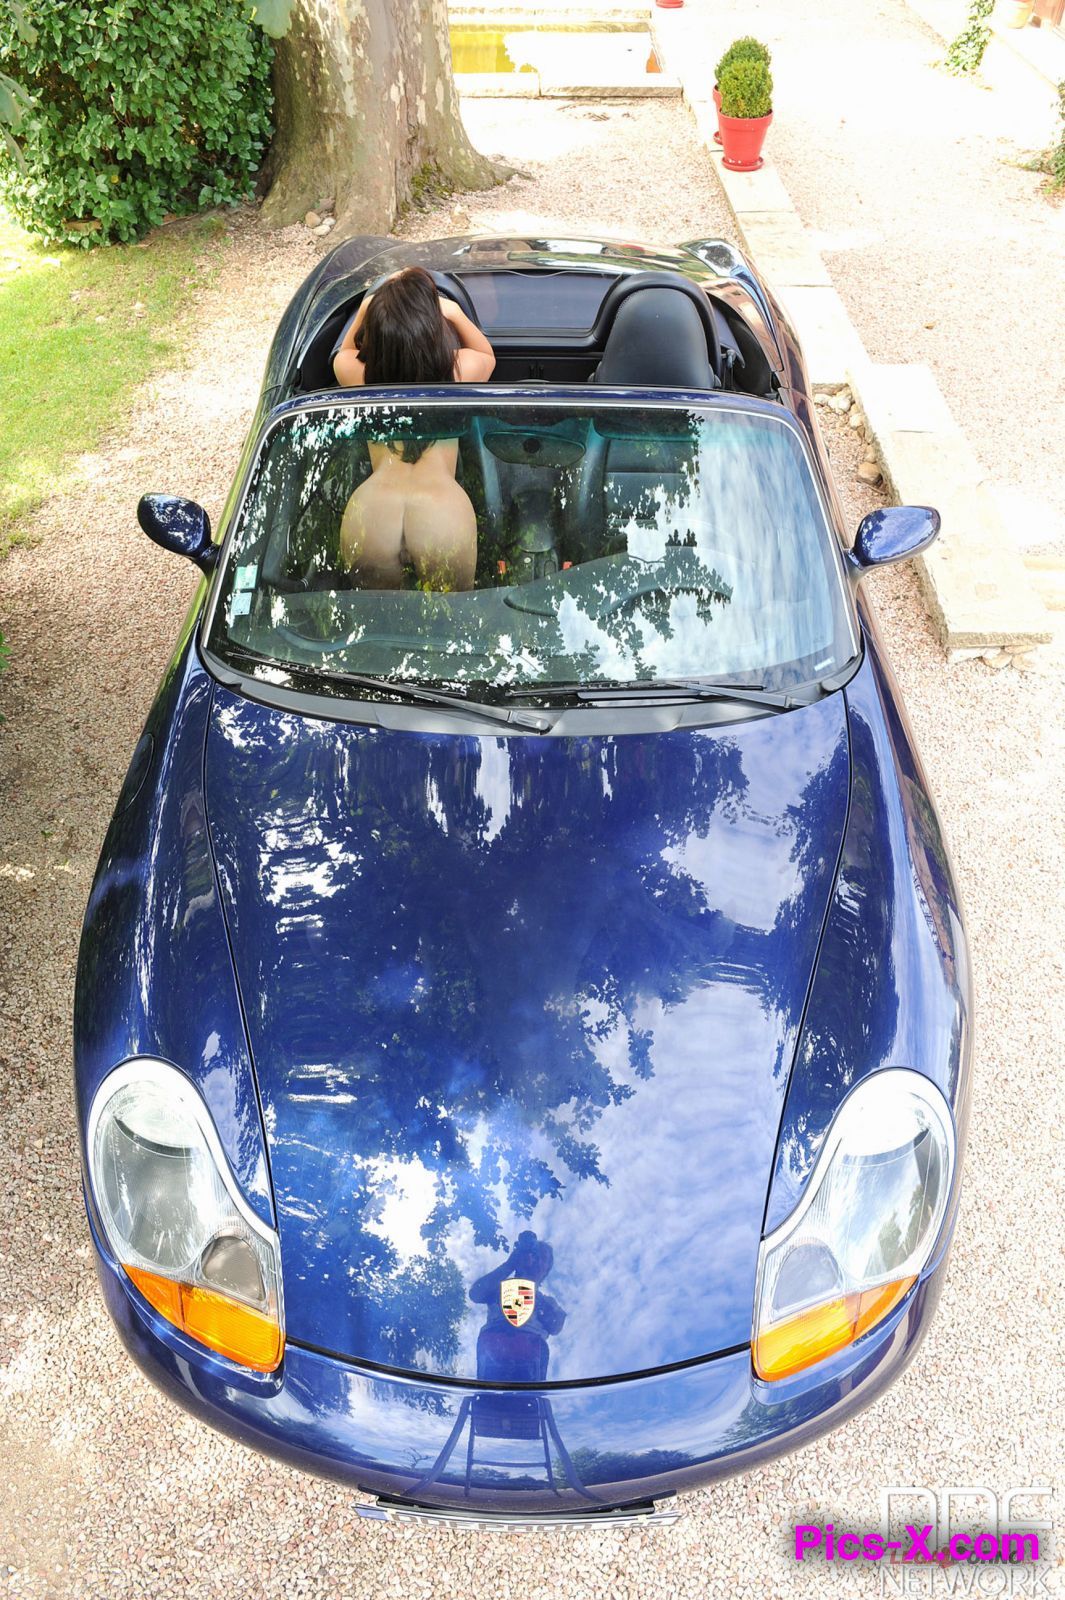 Pussy on the Porsche! - Porn World - Image 52